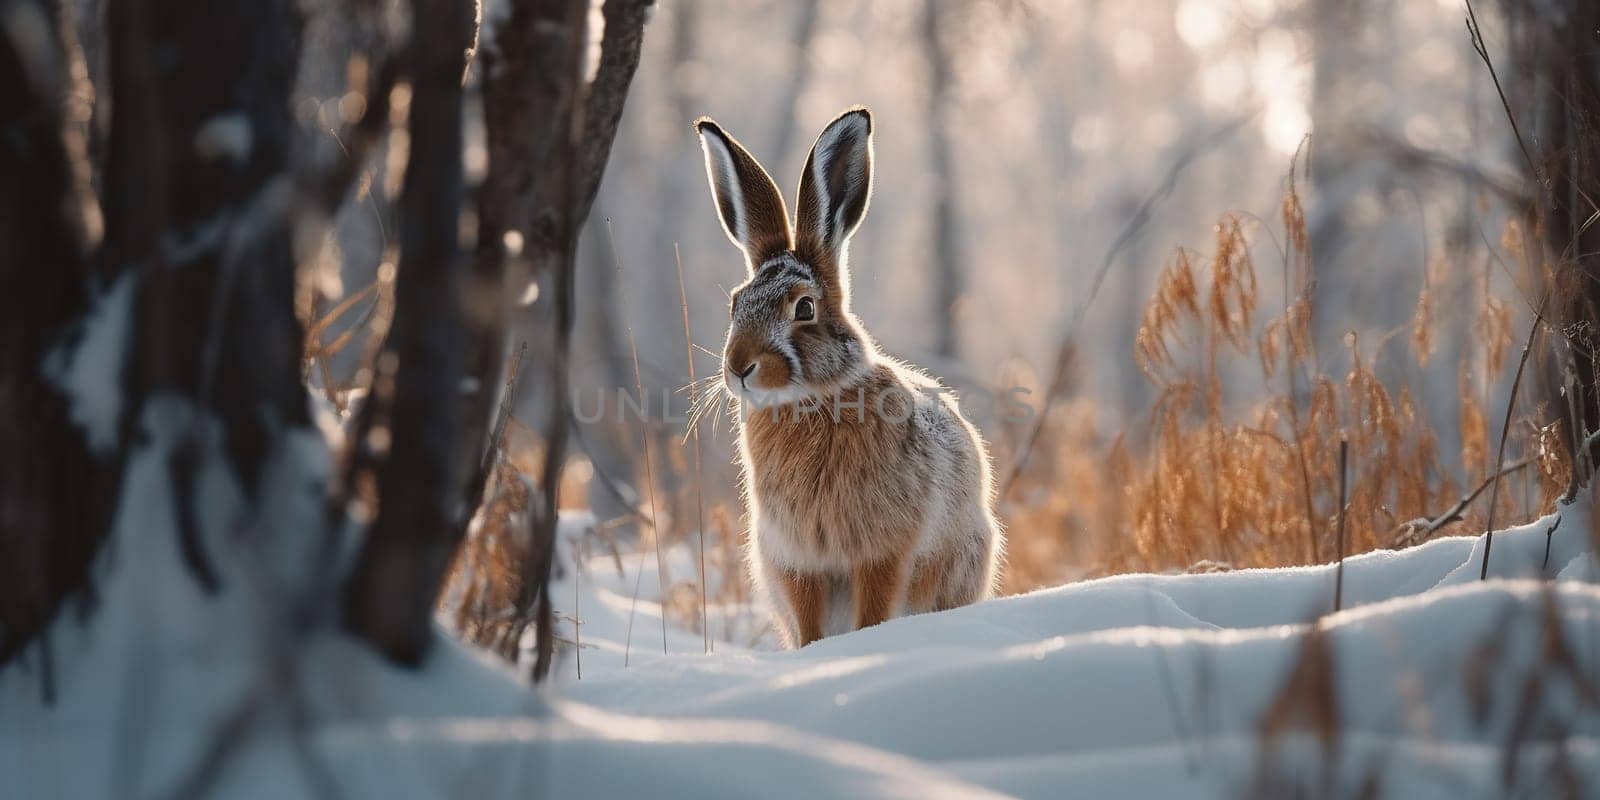 Big Wild Hare In The Snow In Winter Forest, Animal In Natural Habitat